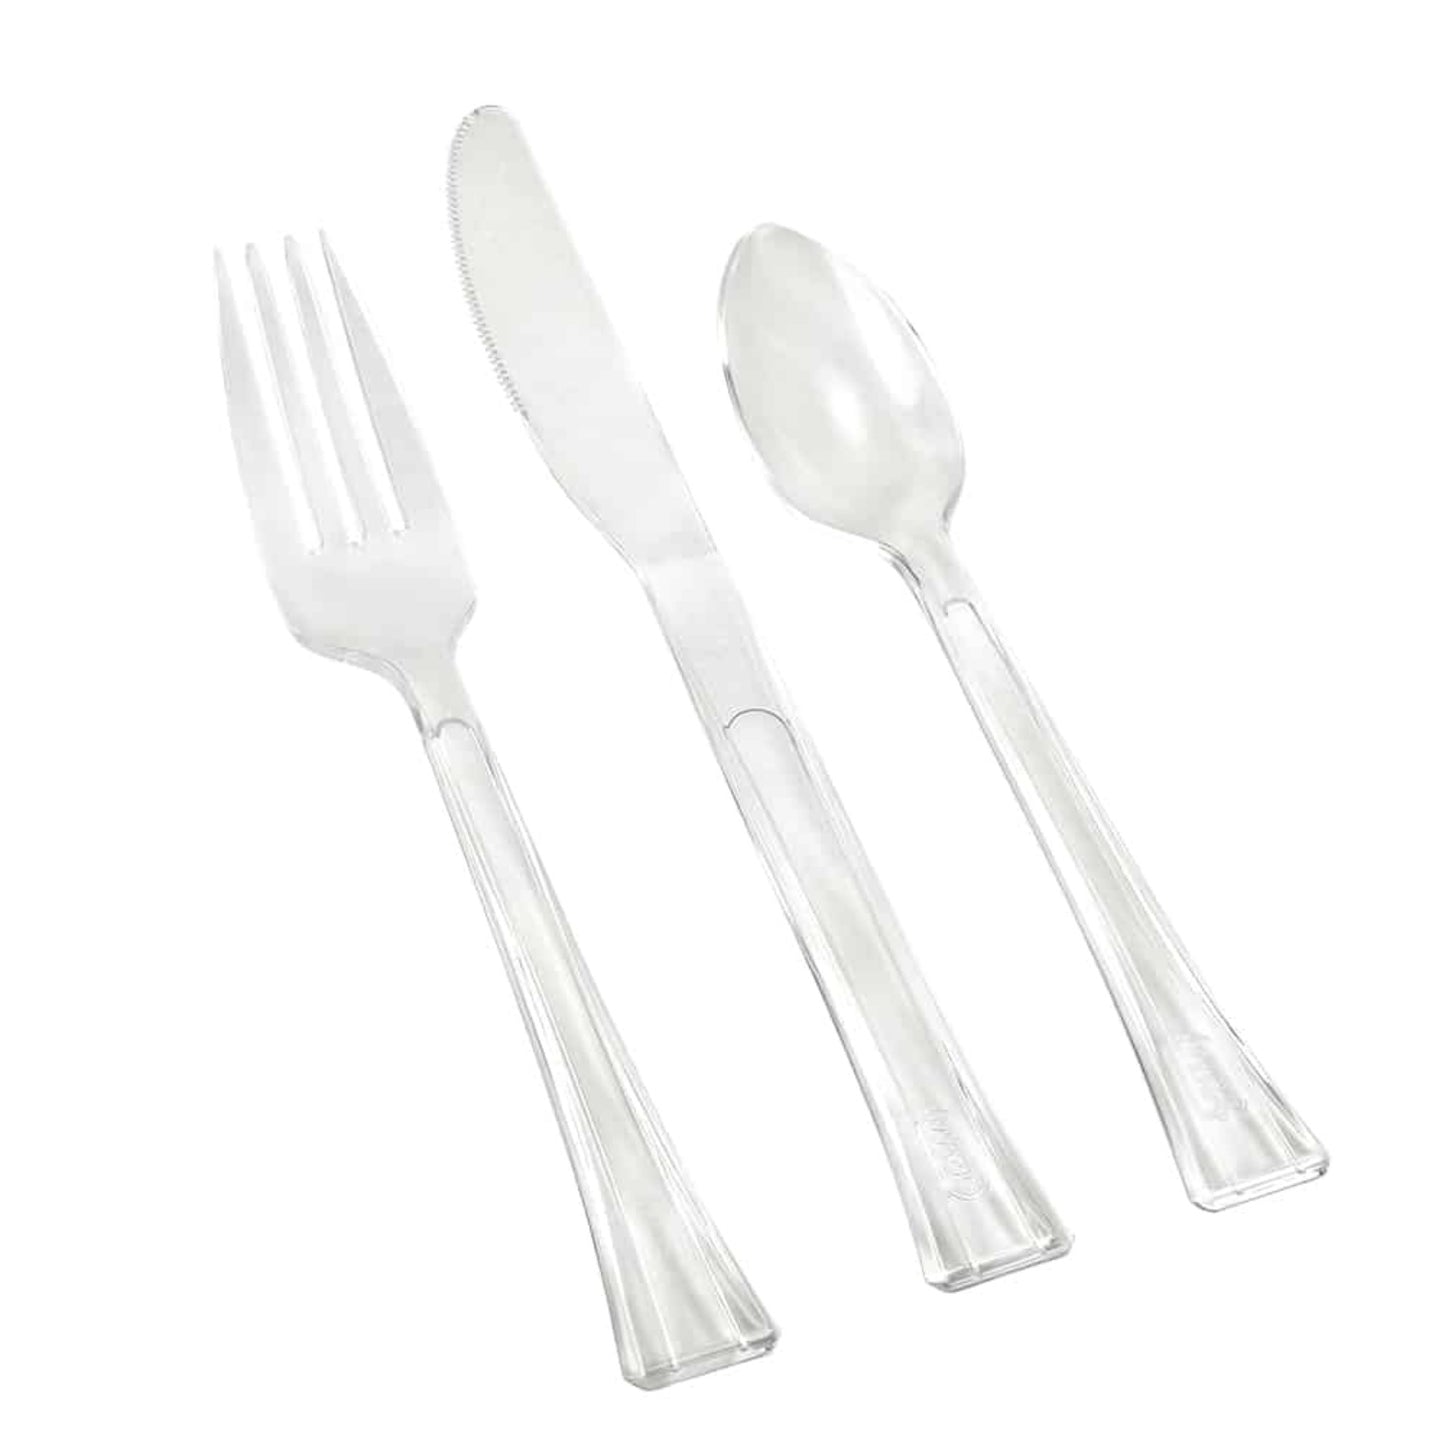 Lillian Tablesettings Extra Strong Quality Premium Clear Plastic Knives Cutlery Lillian   